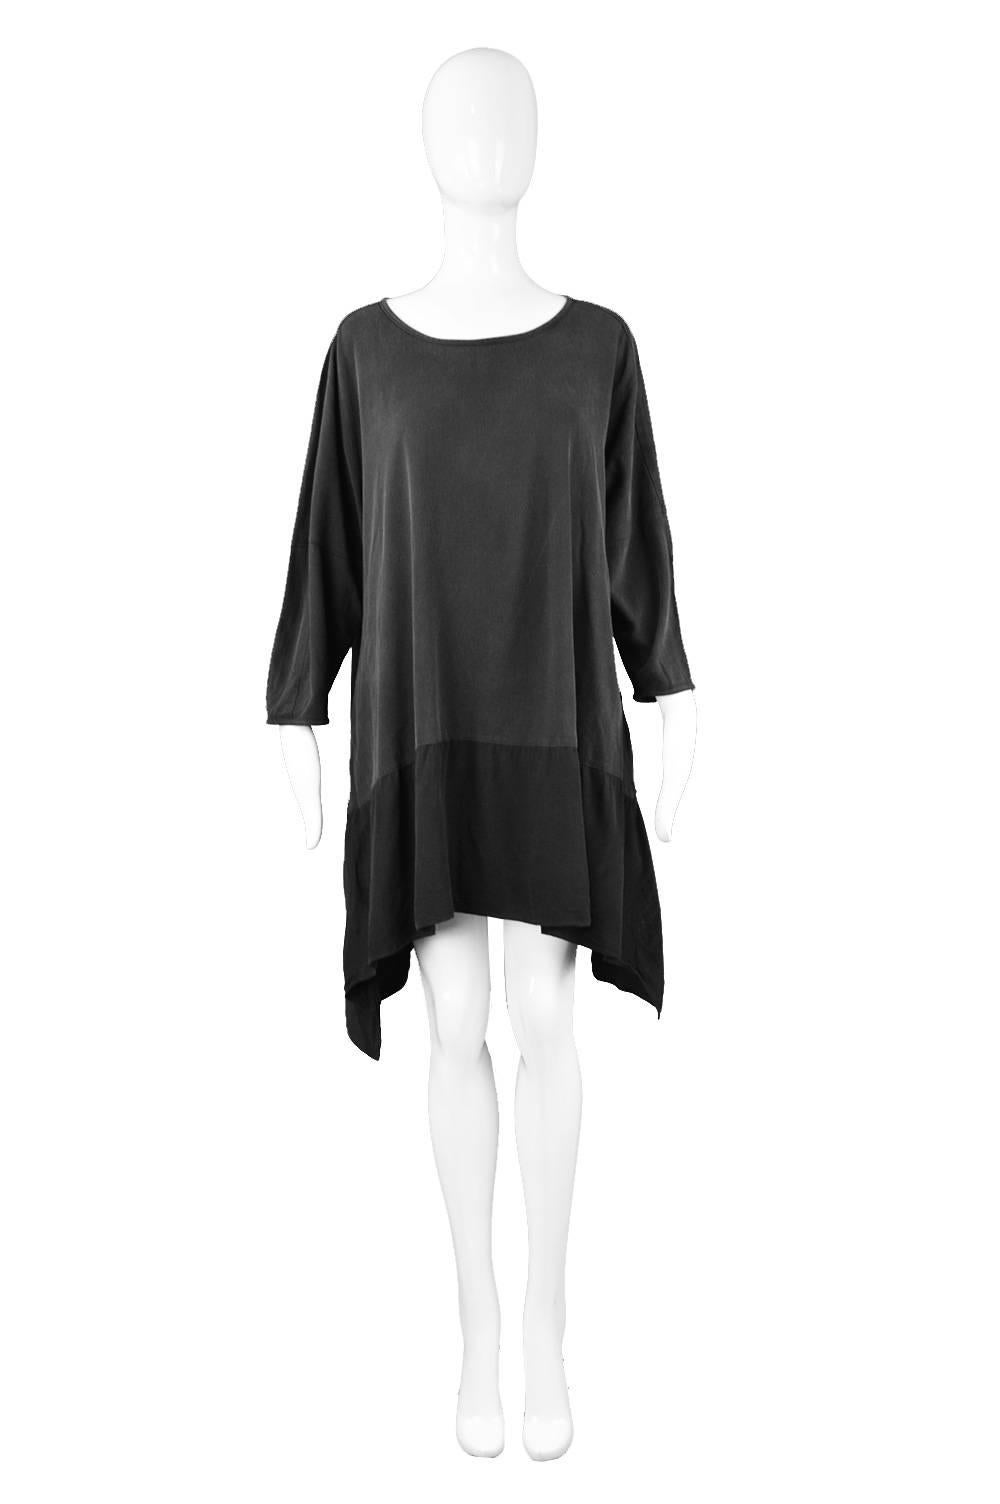 An incredible vintage women's vintage tunic mini dress by rare, highly sought after label, Workers for Freedom. In a minimalist/ lagenlook style from the Spring Summer 1995 collection. In a black cotton with a faded effect on top and a slinky rayon